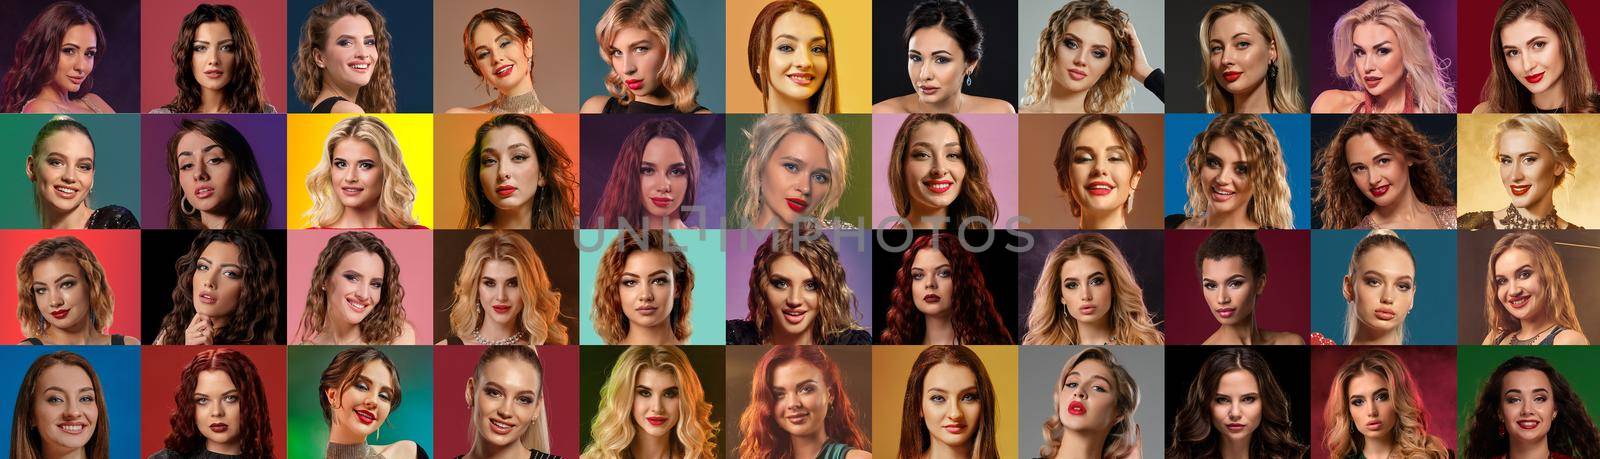 Collage of women and men faces expressing different facial emotions, smiling, unsmiling. Posing on colorful backgrounds by nazarovsergey